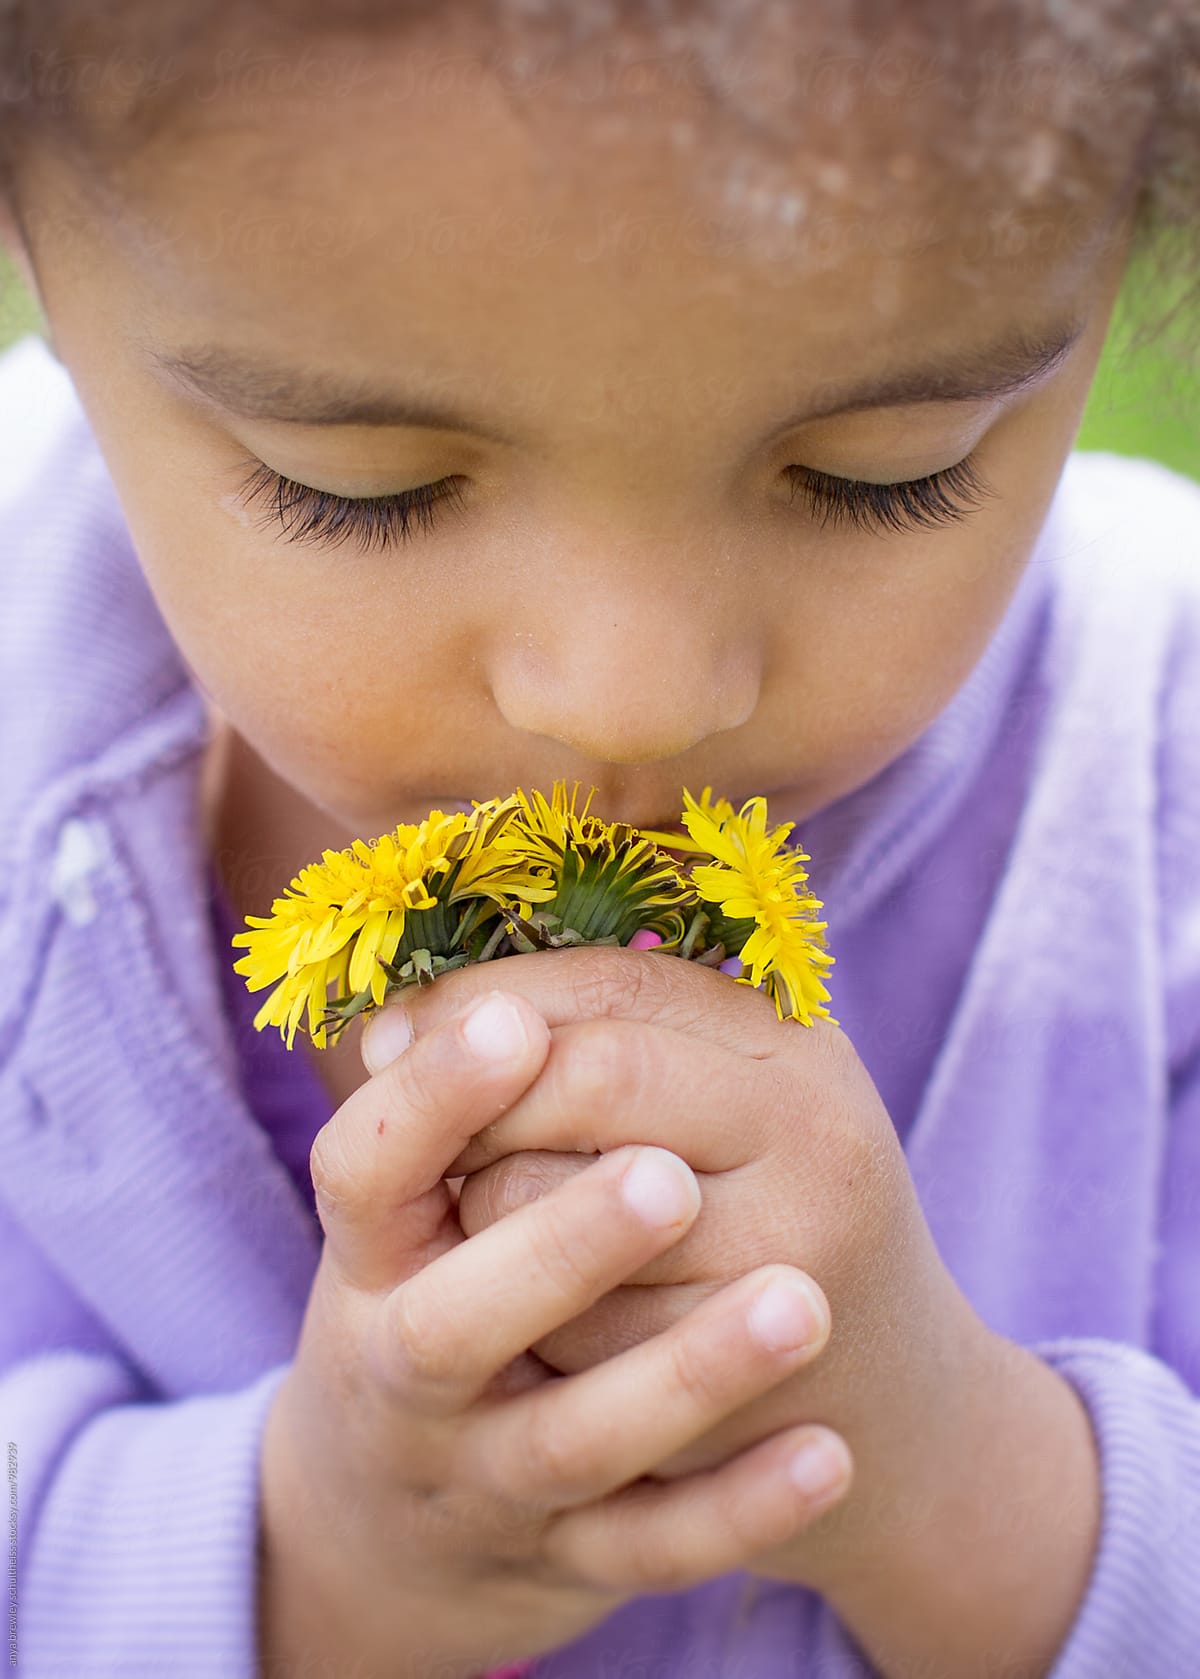 A young girl smelling a bundle of yellow dandelions